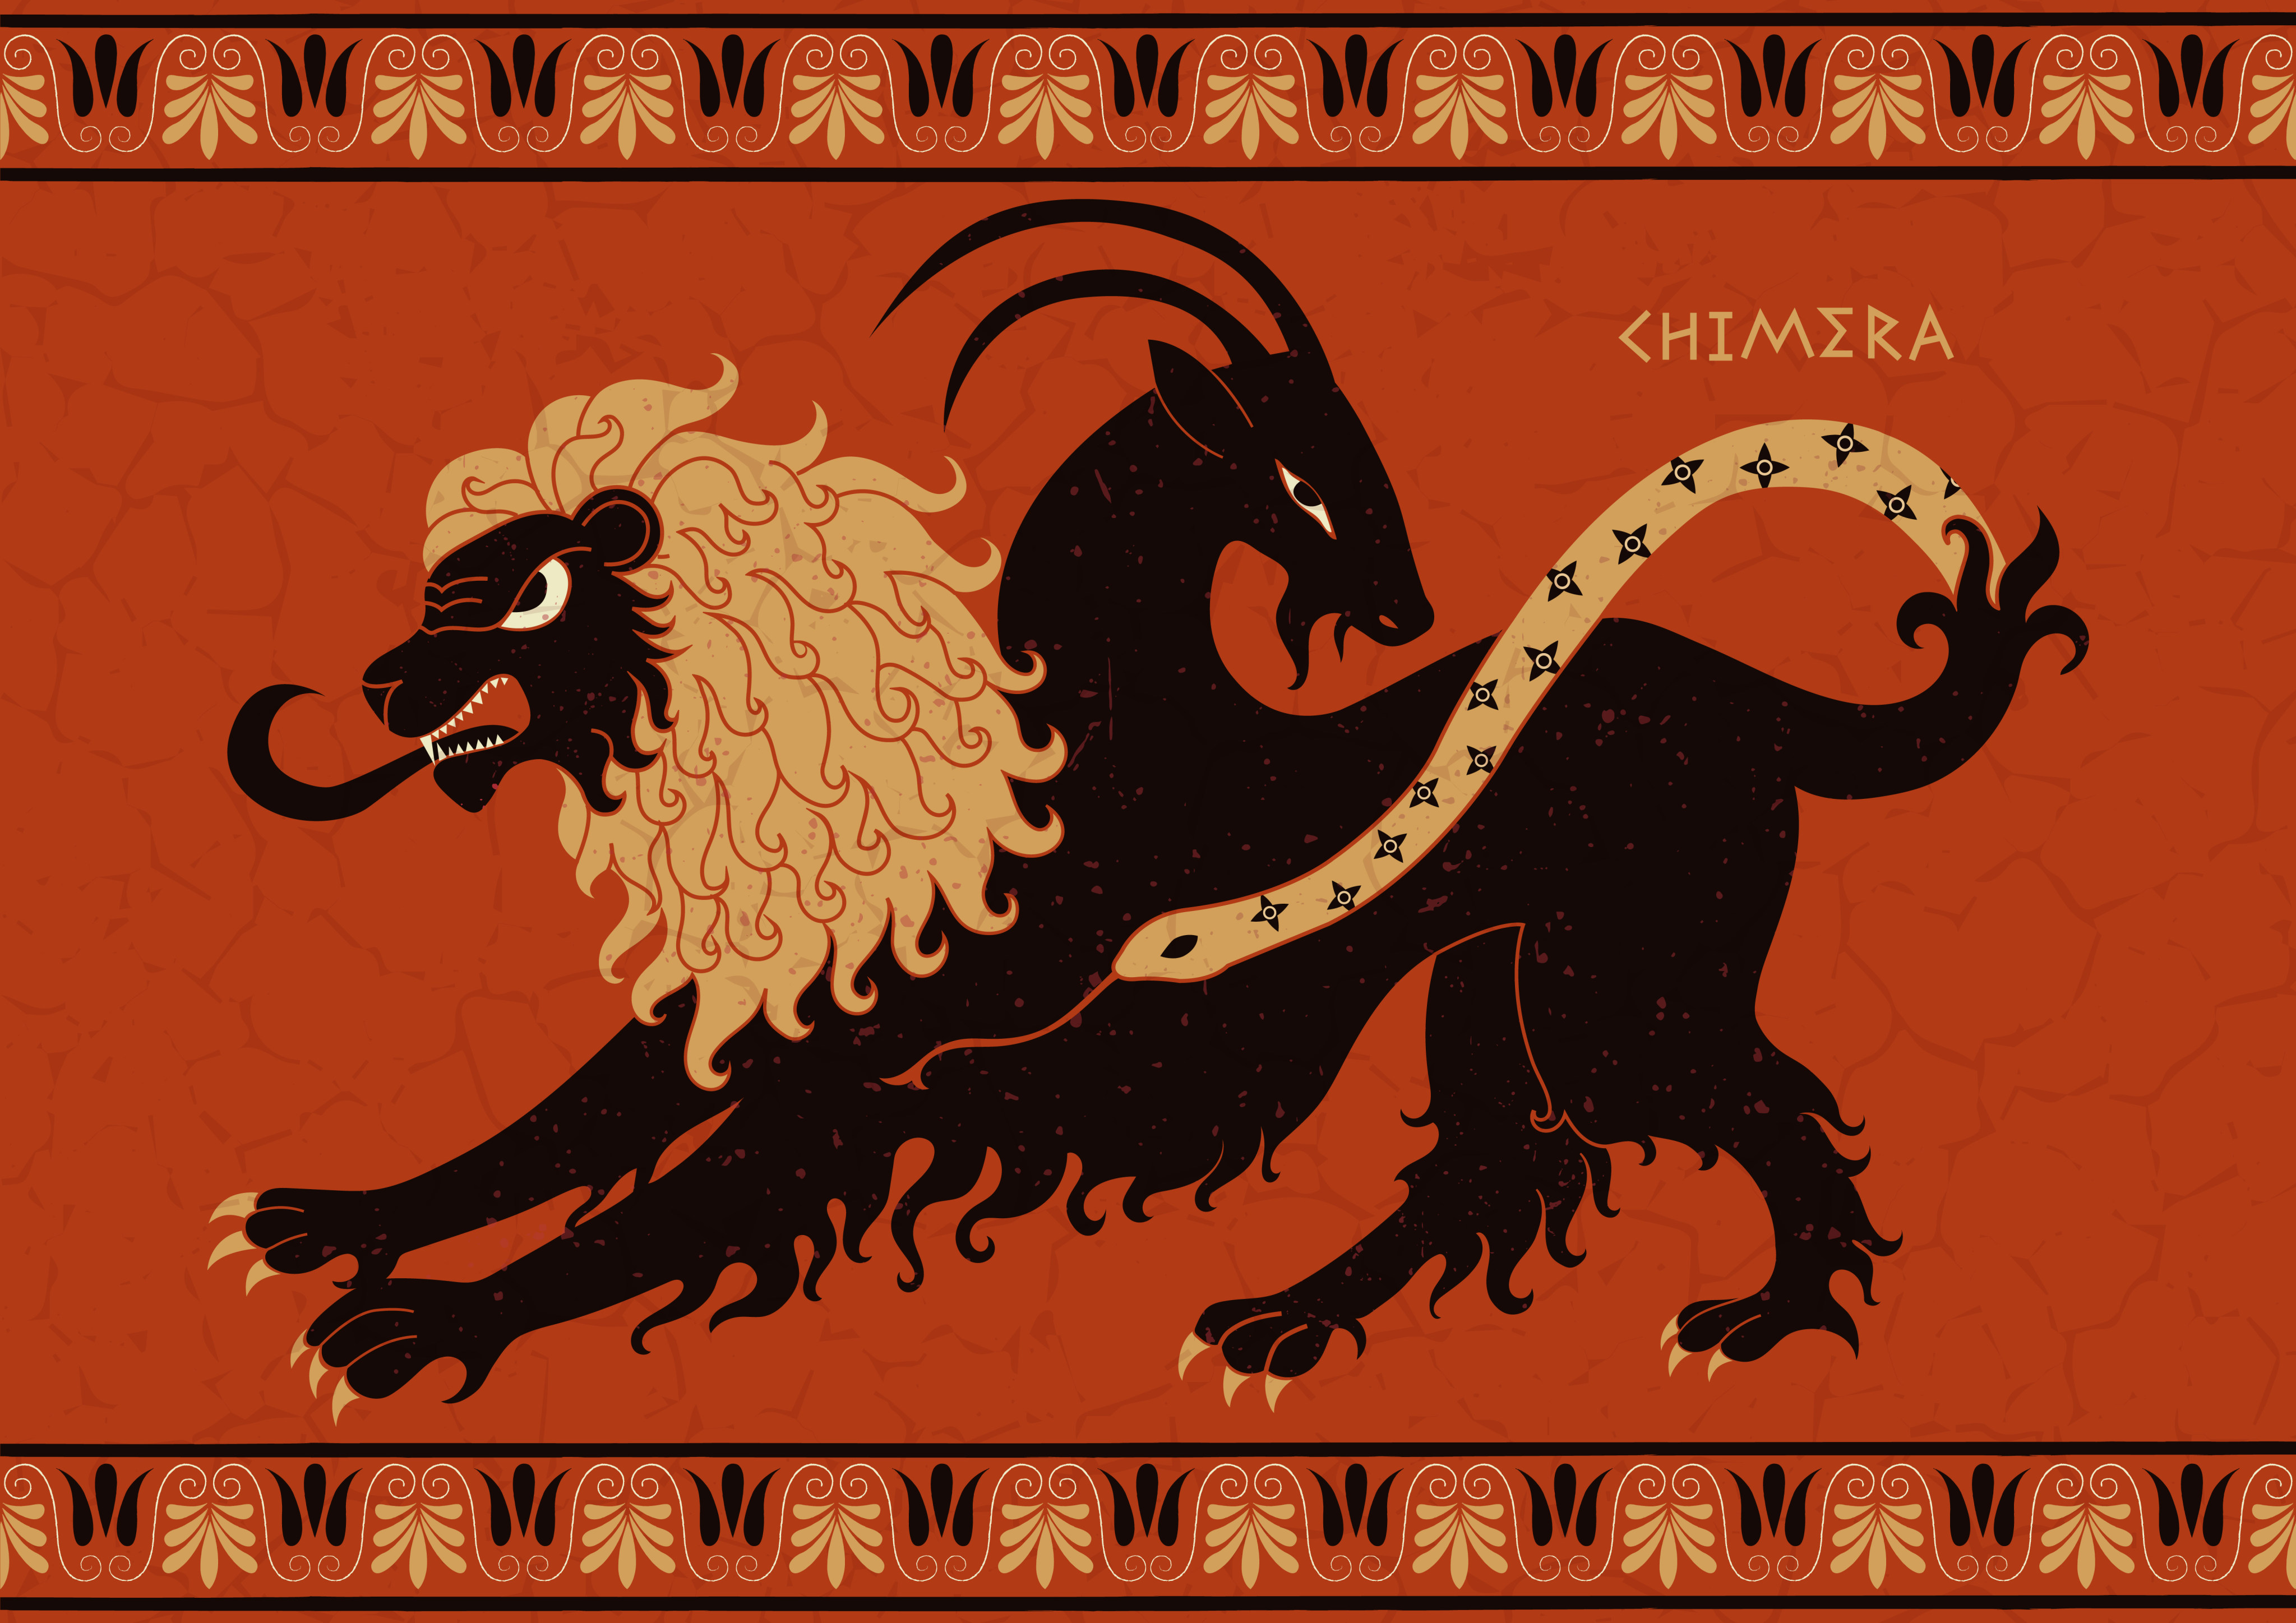 According to the ancient Greeks, a Chimera was a mythical beast that combined three different animals - a lion, a goat and a snake. Shutterstock